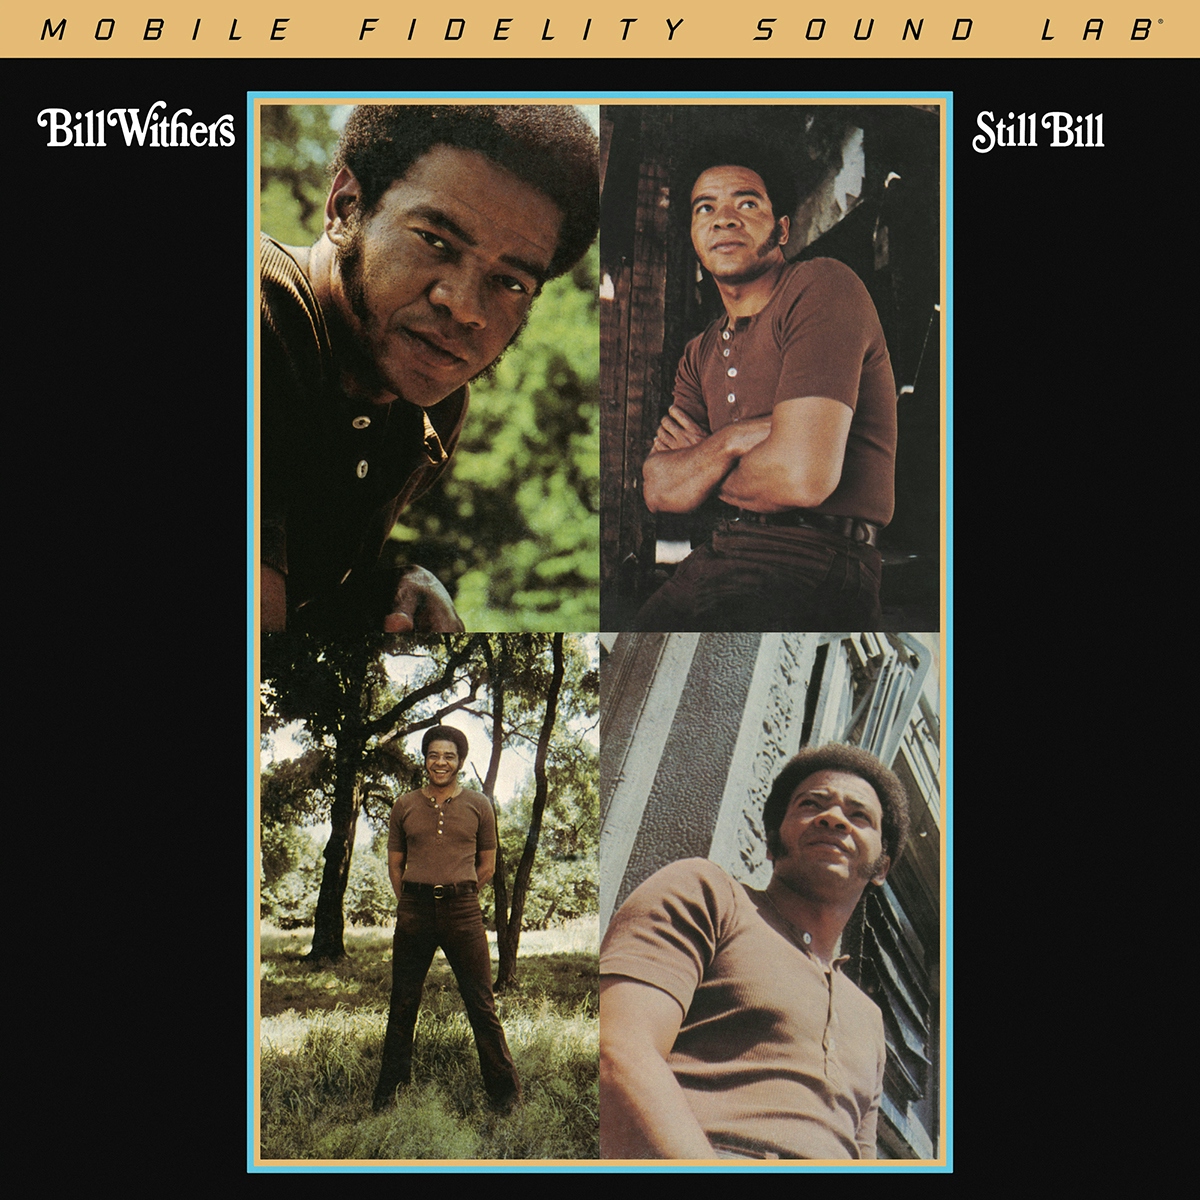 Album artwork for Album artwork for Still Bill (Mobile Fidelity Edition) by Bill Withers by Still Bill (Mobile Fidelity Edition) - Bill Withers